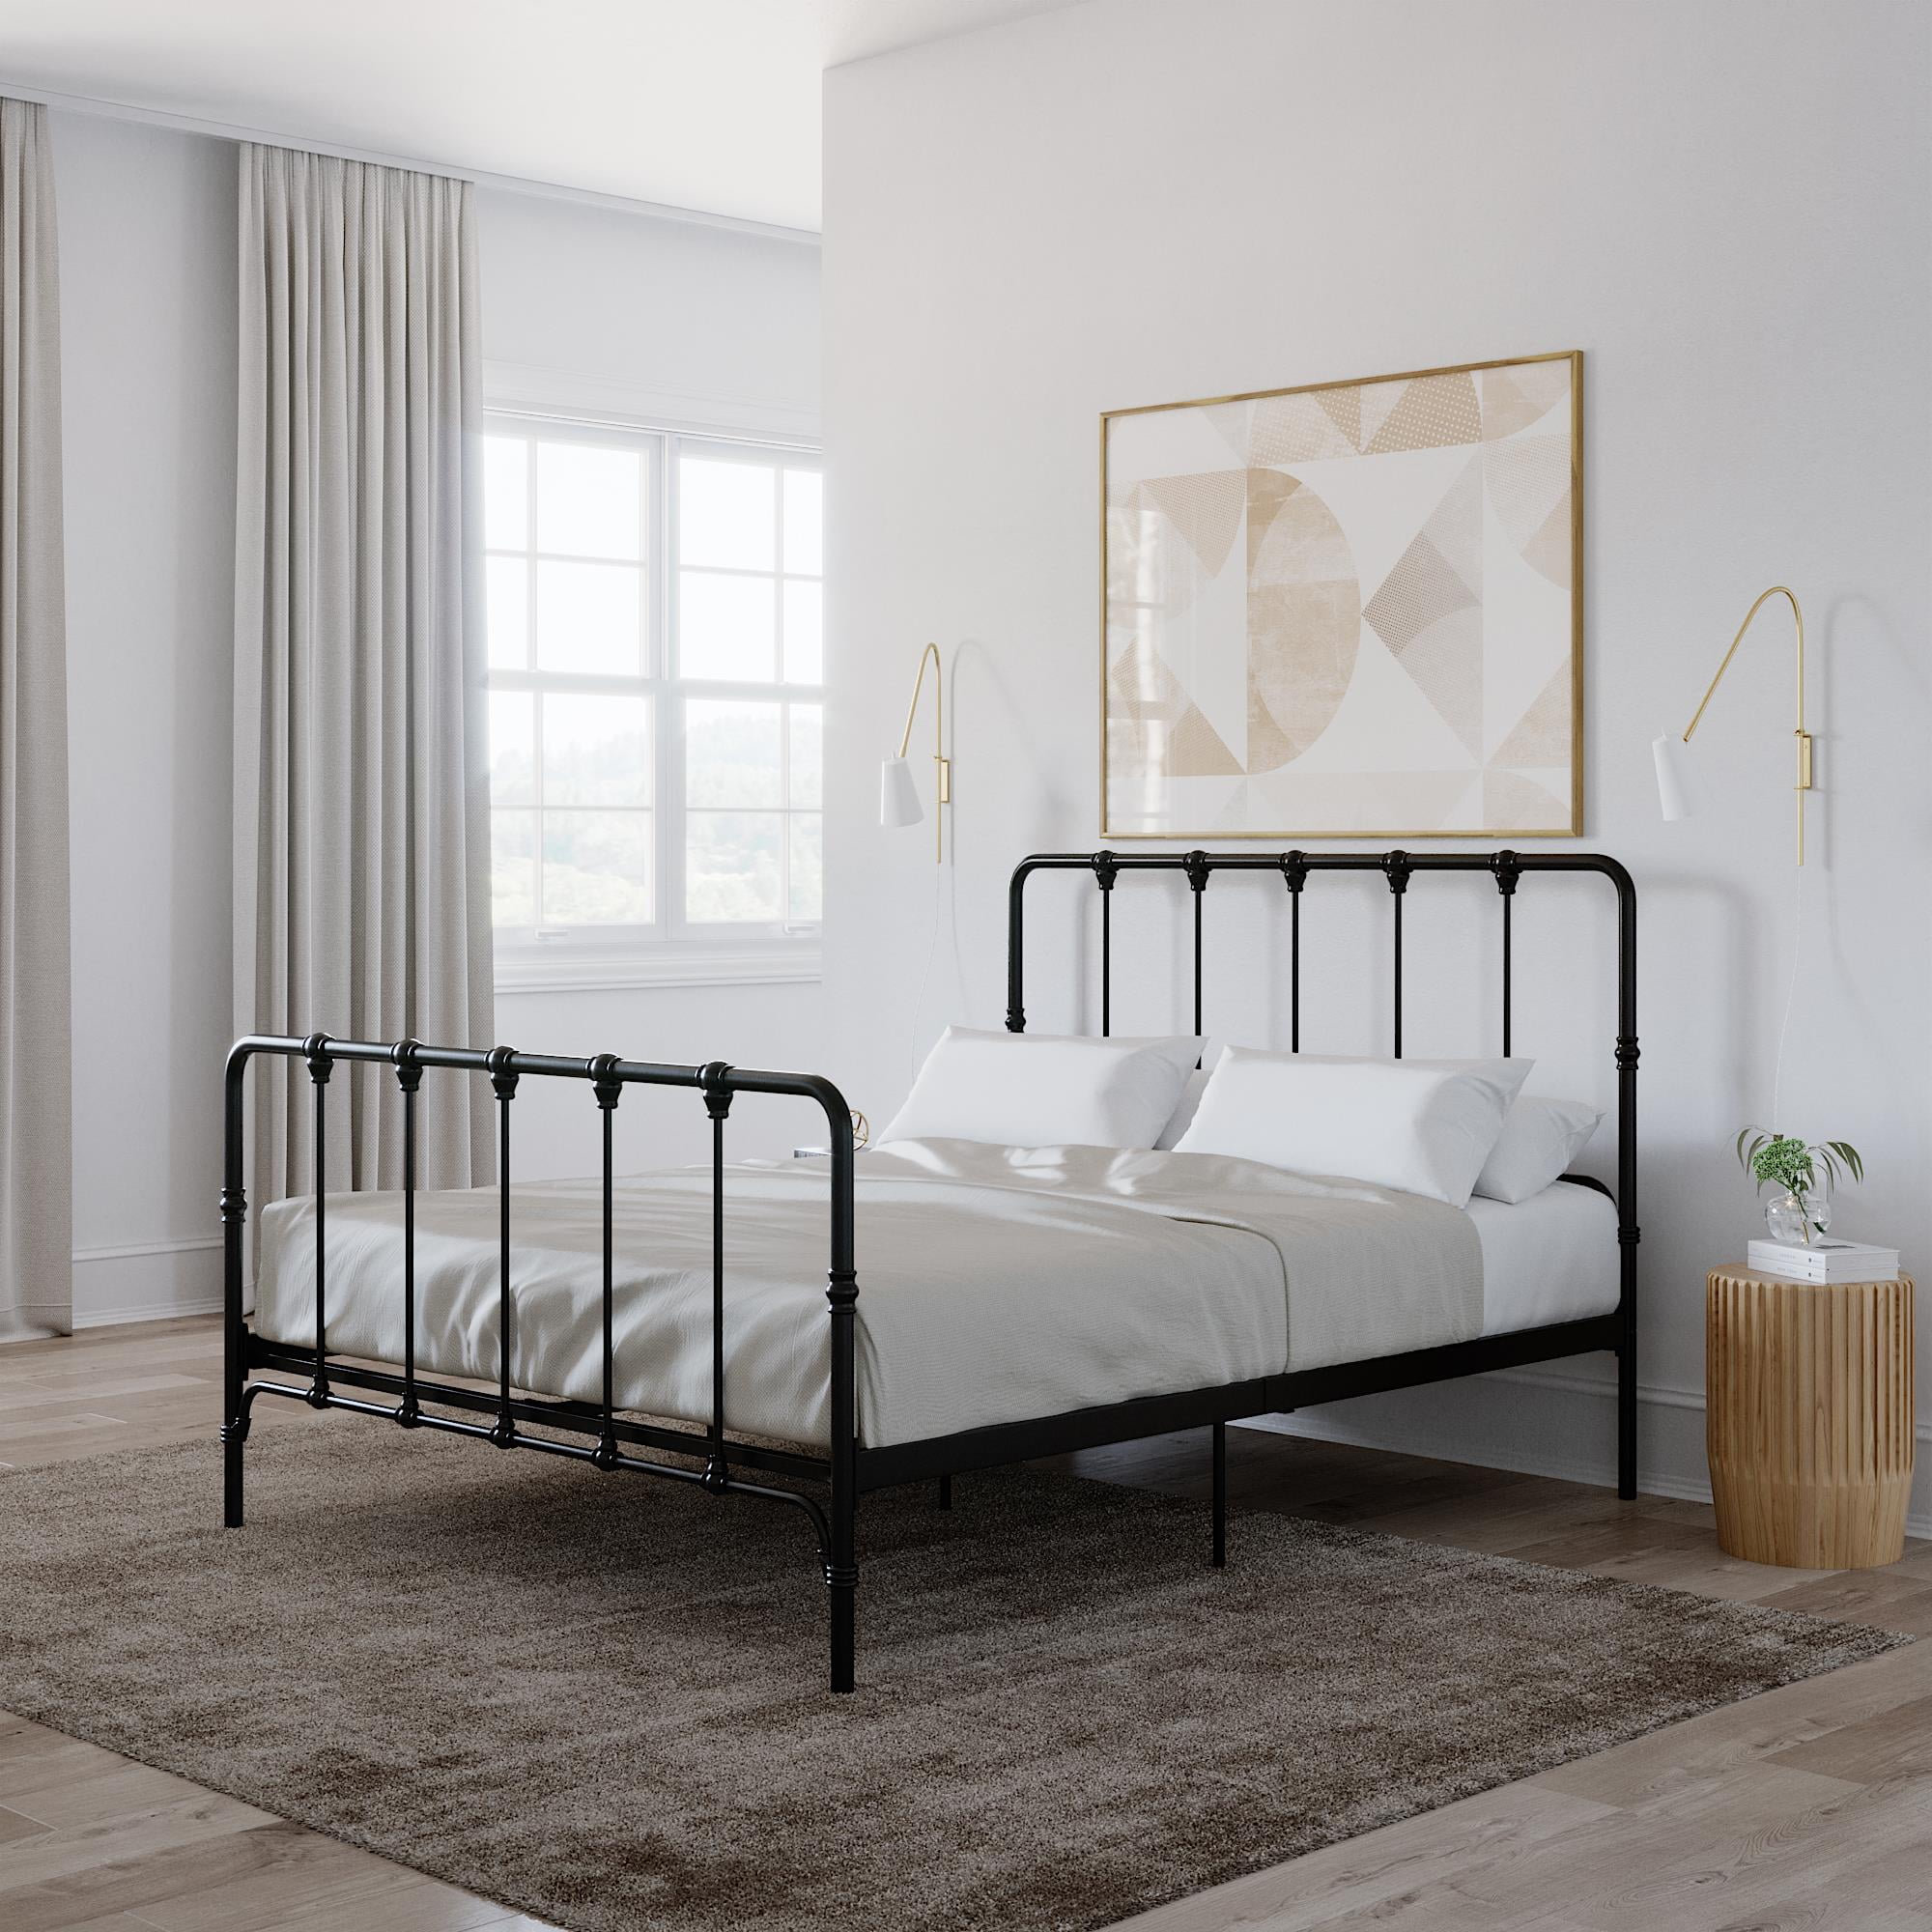 Mainstays Farmhouse Metal Bed, Full Size Bed Frame, Black 